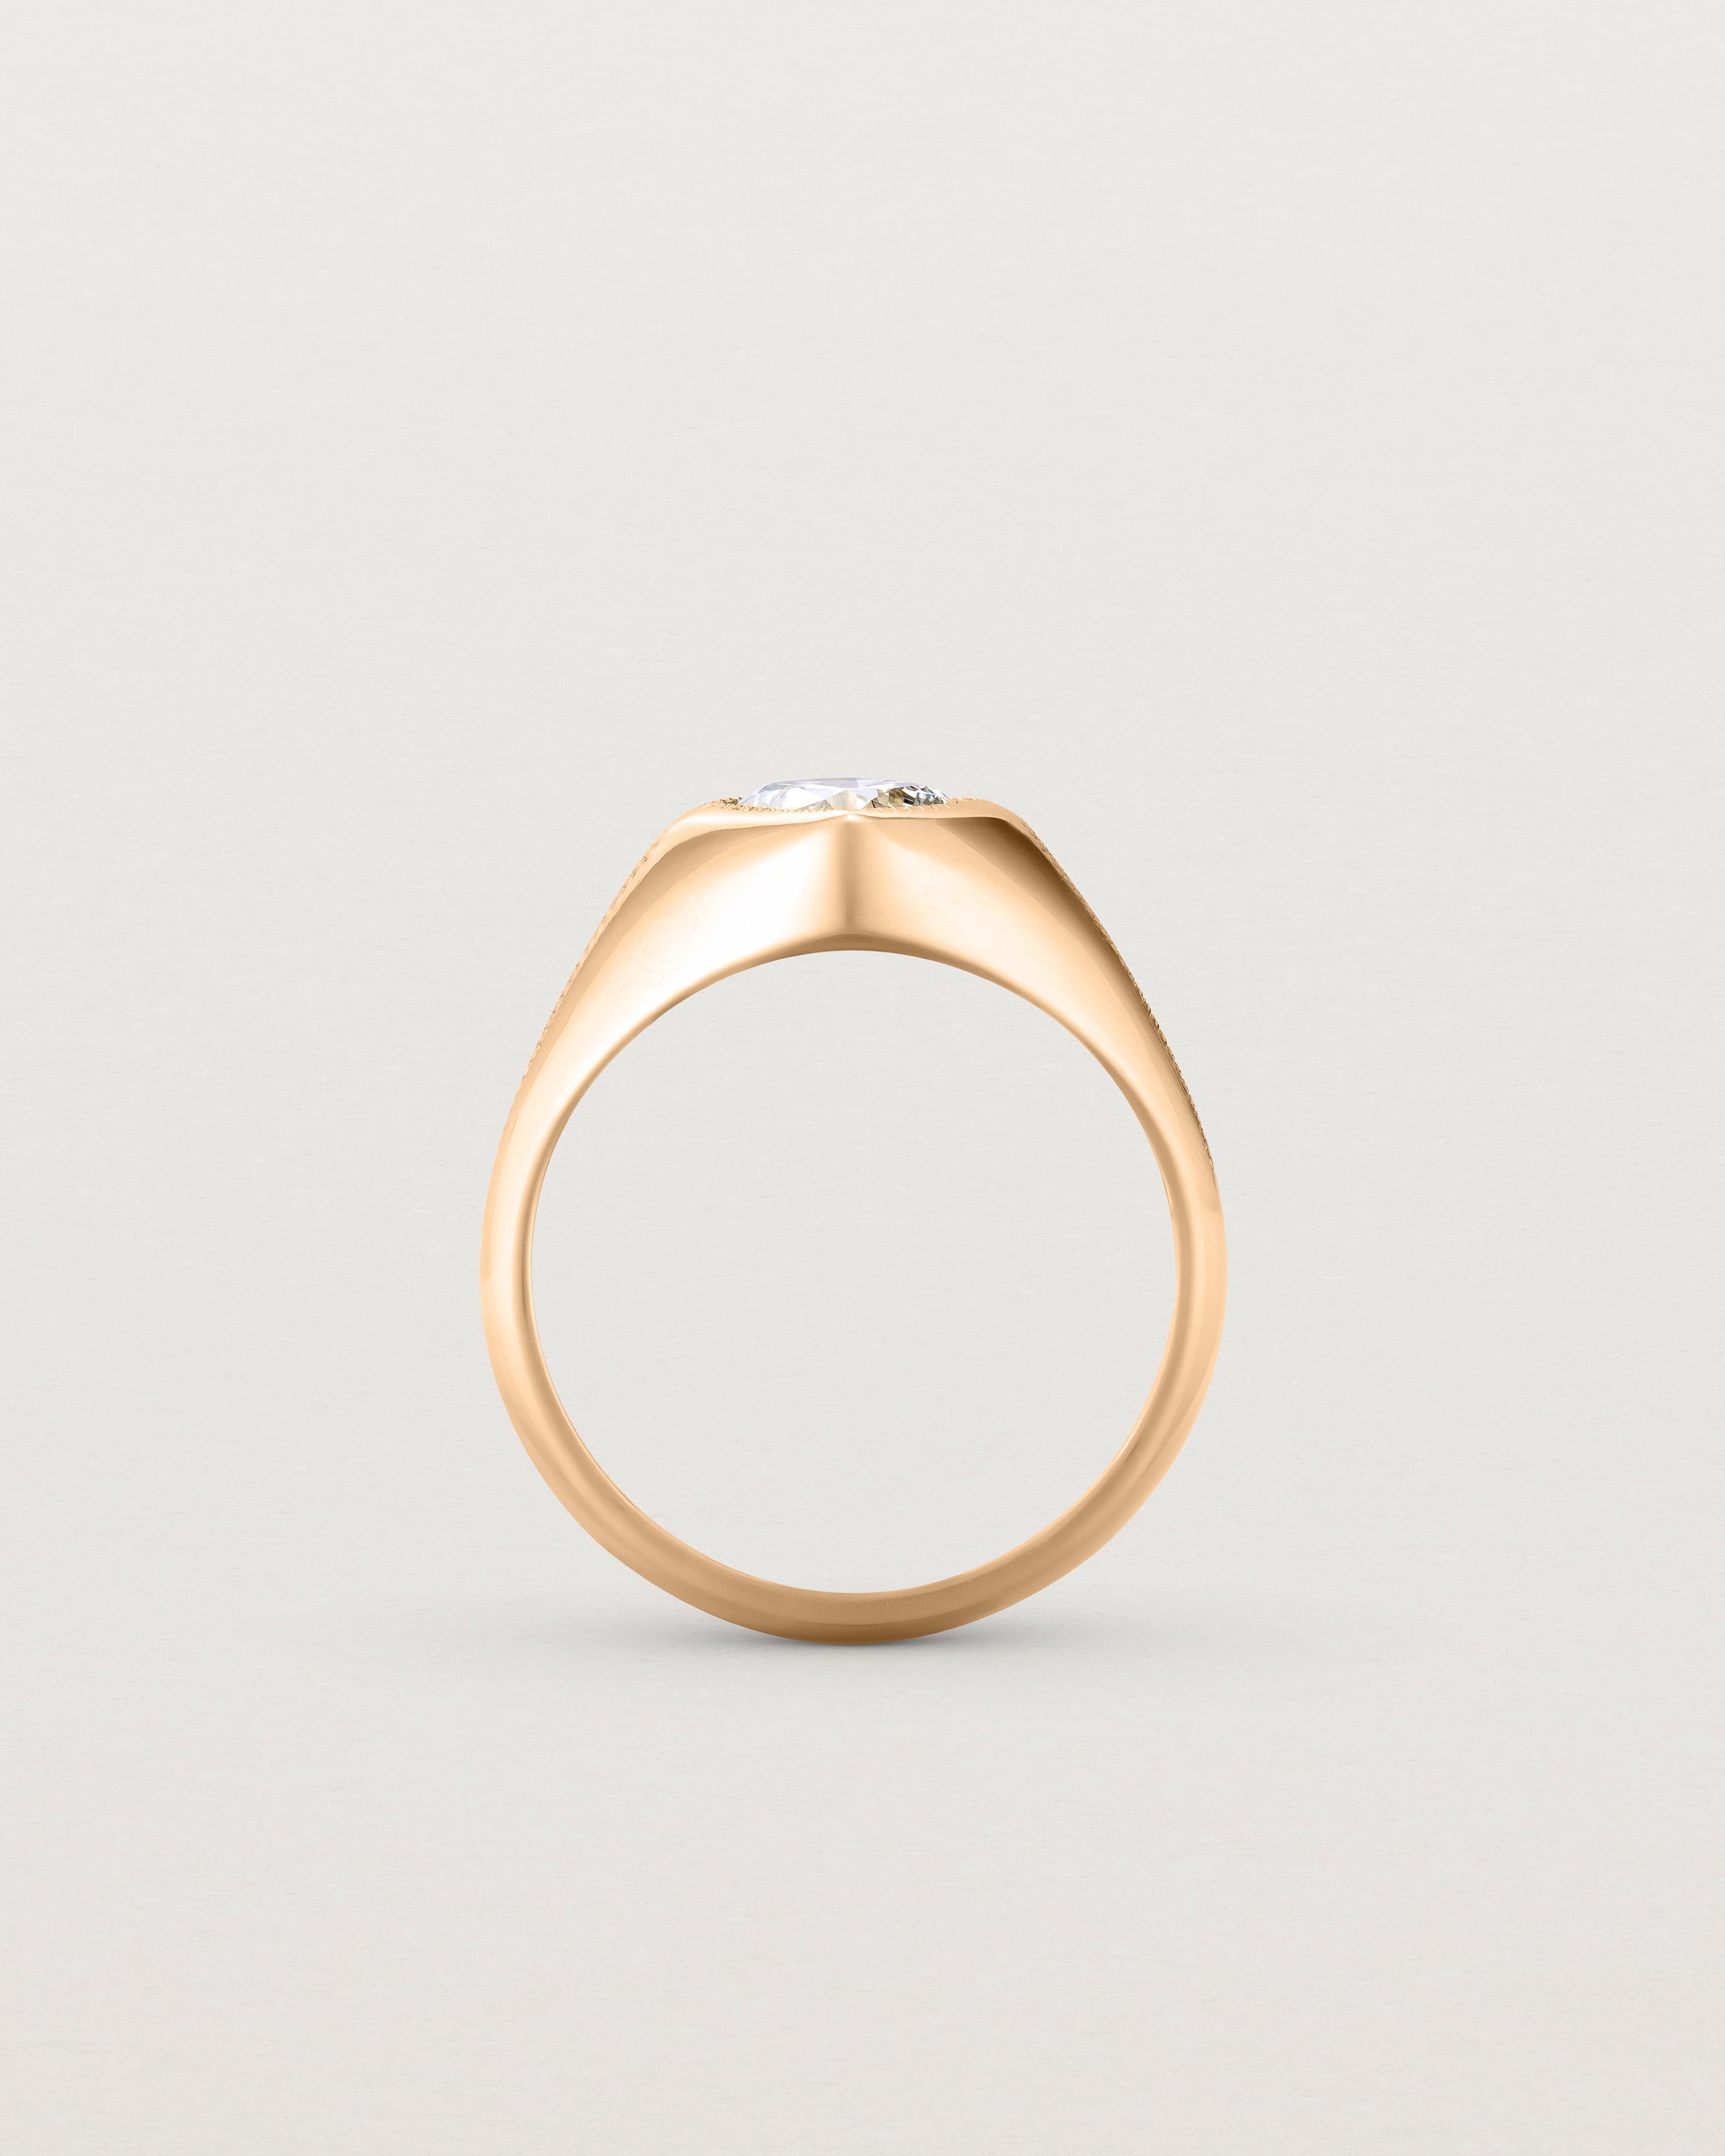 Standing view of the Átlas Cushion Signet | Laboratory Grown Diamond in rose gold.